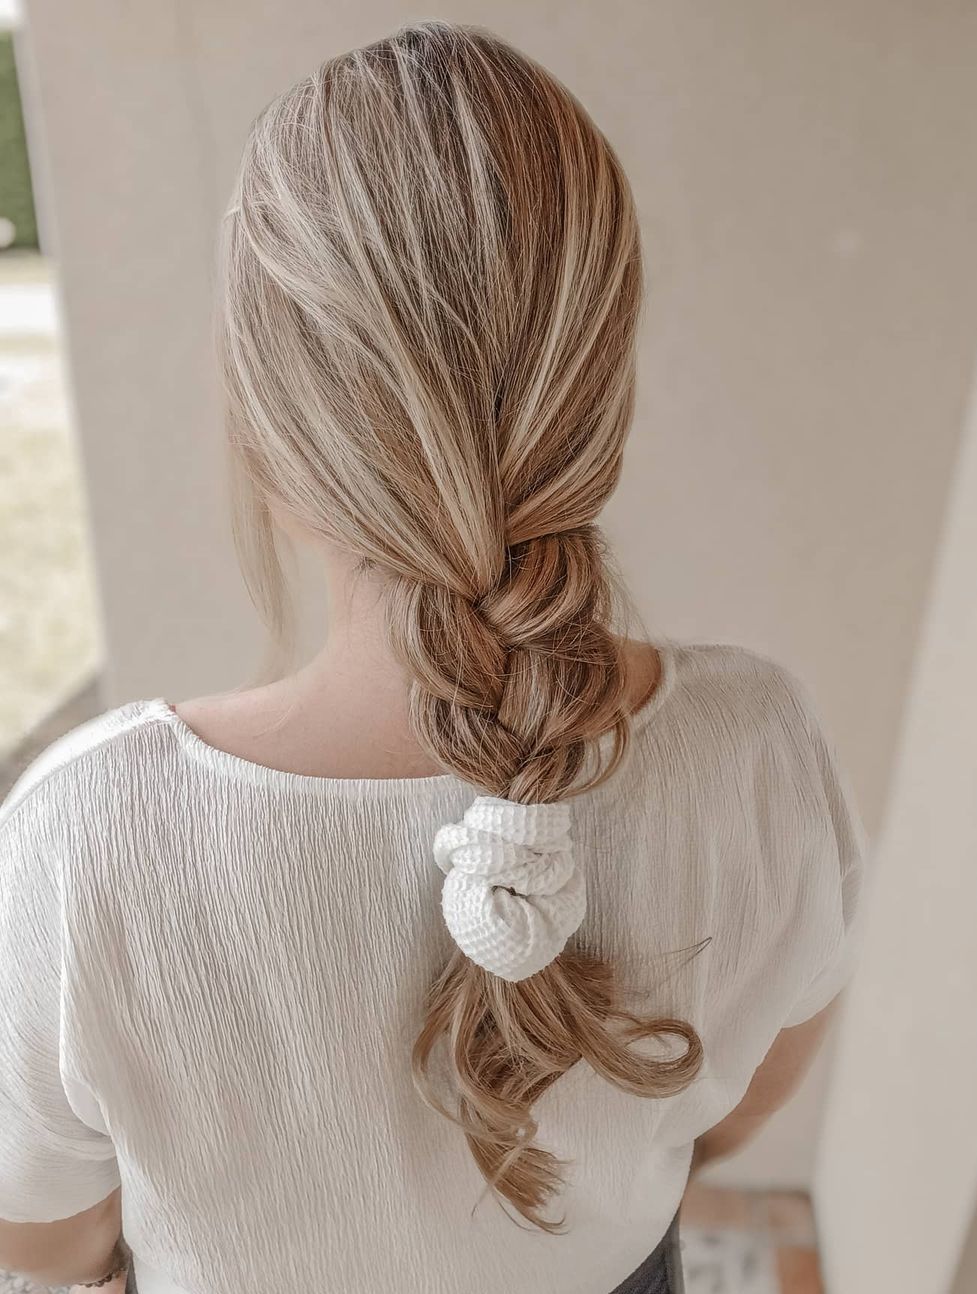 Loose French Braid Hairstyle for Summer